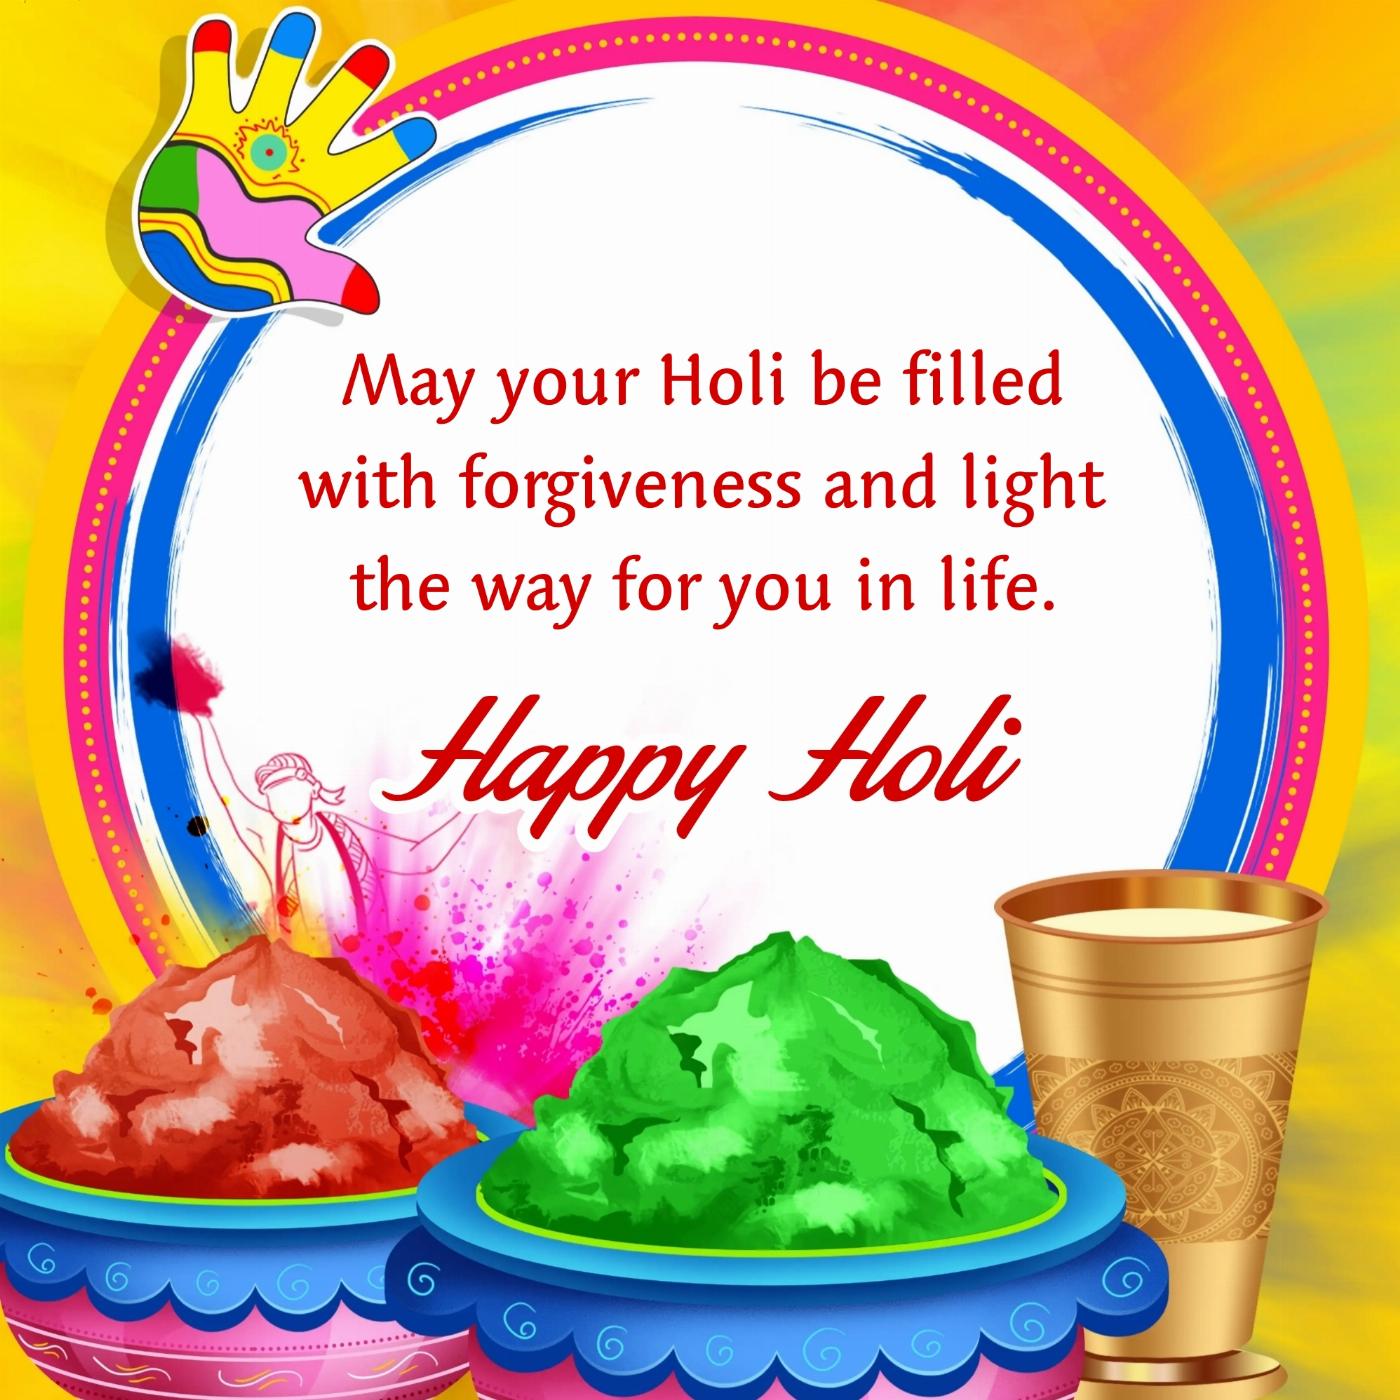 May your Holi be filled with forgiveness and light the way for you in life